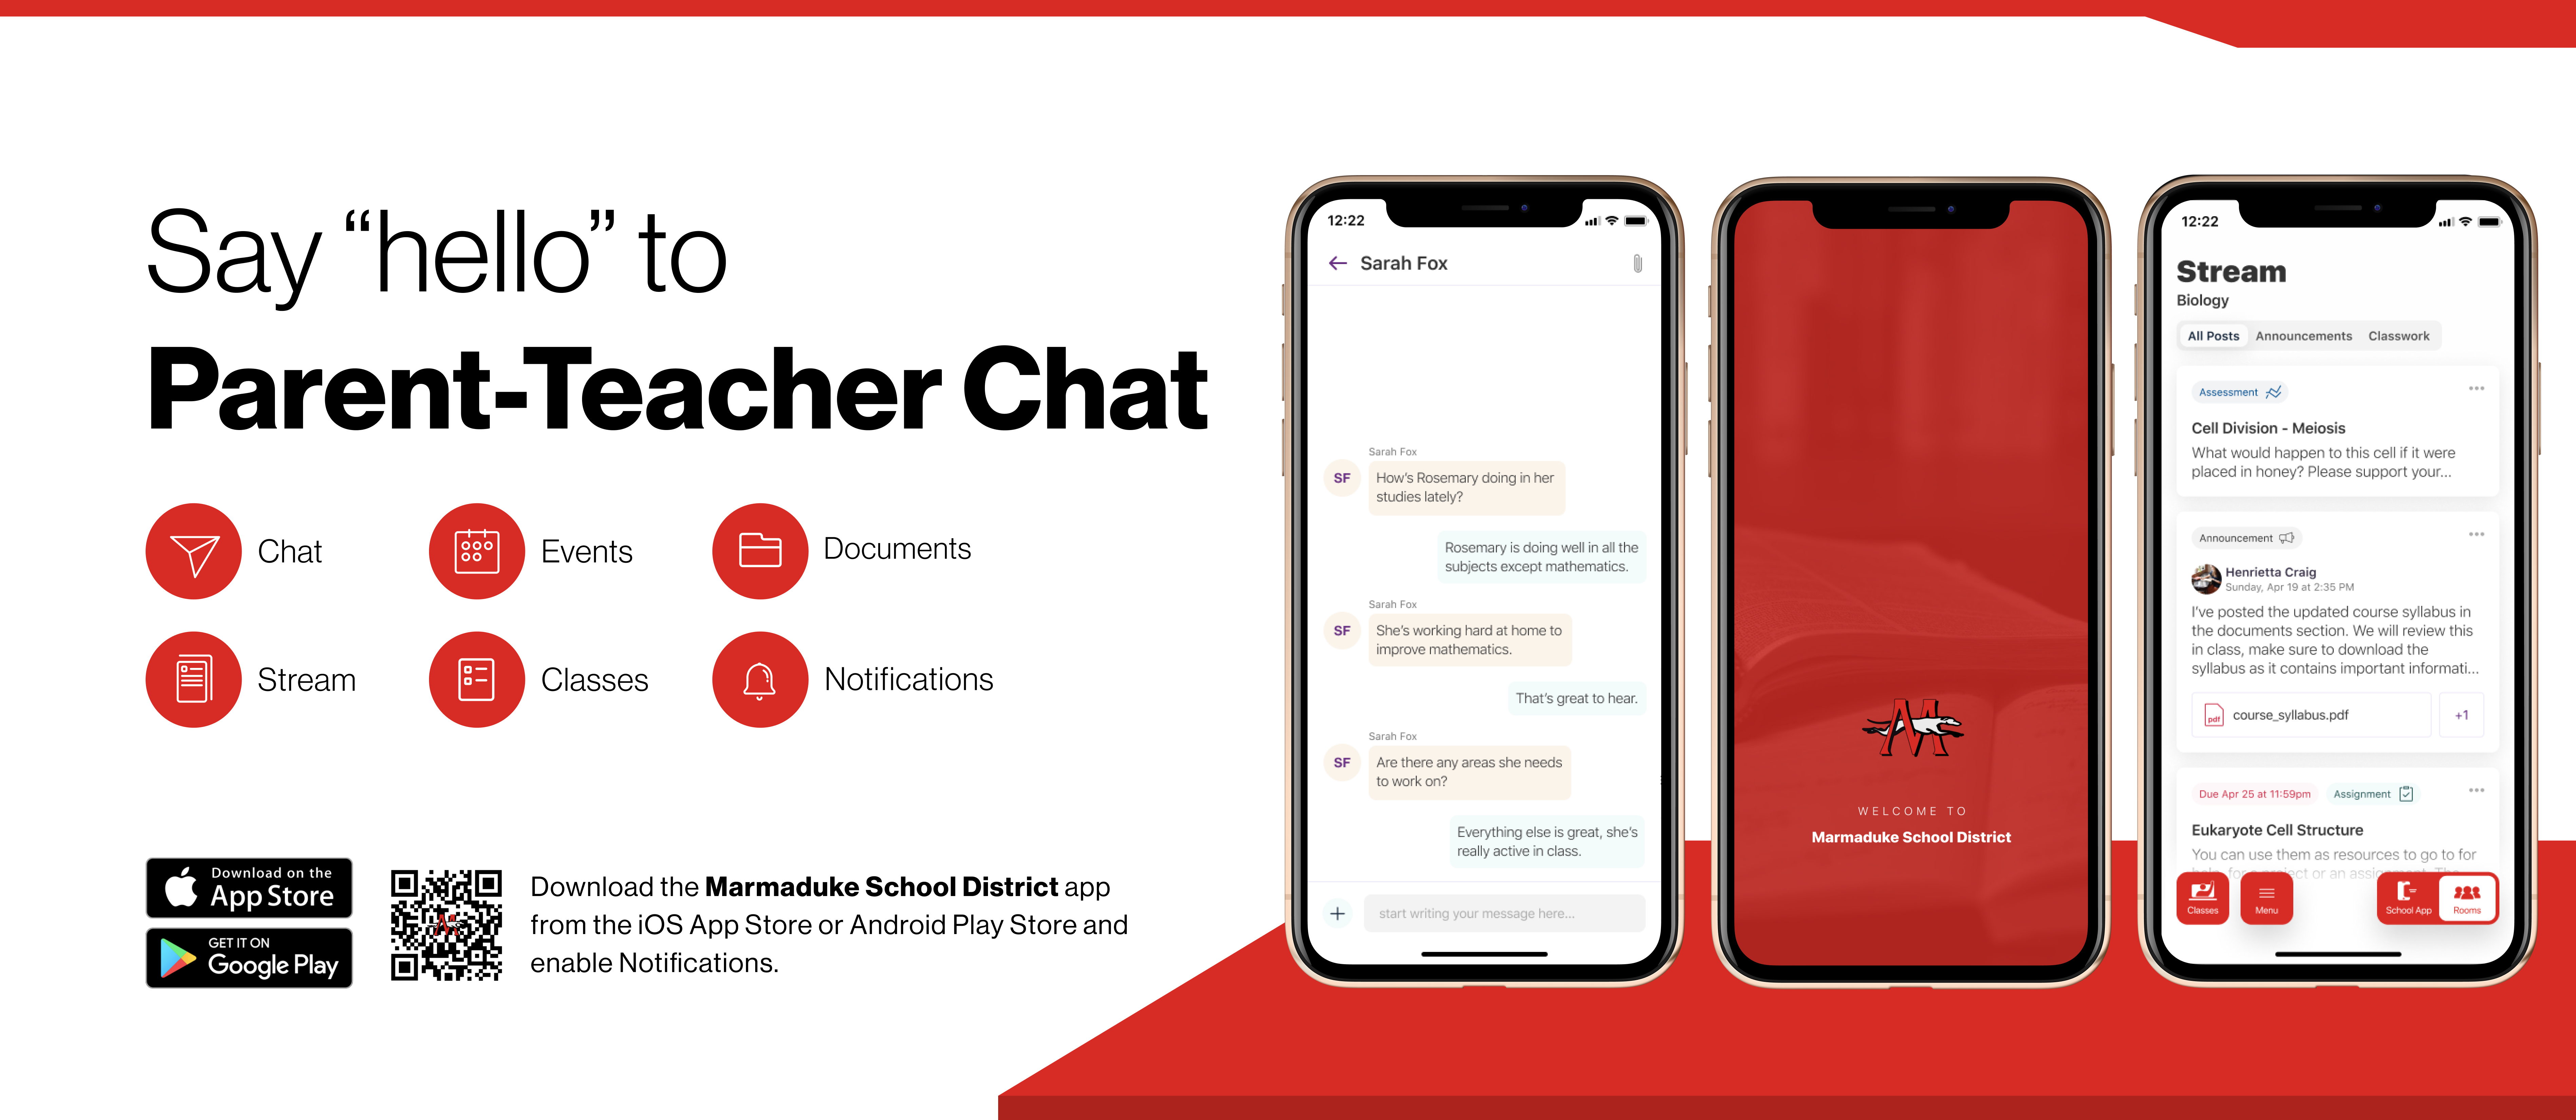 Rooms - Chat with your Teacher